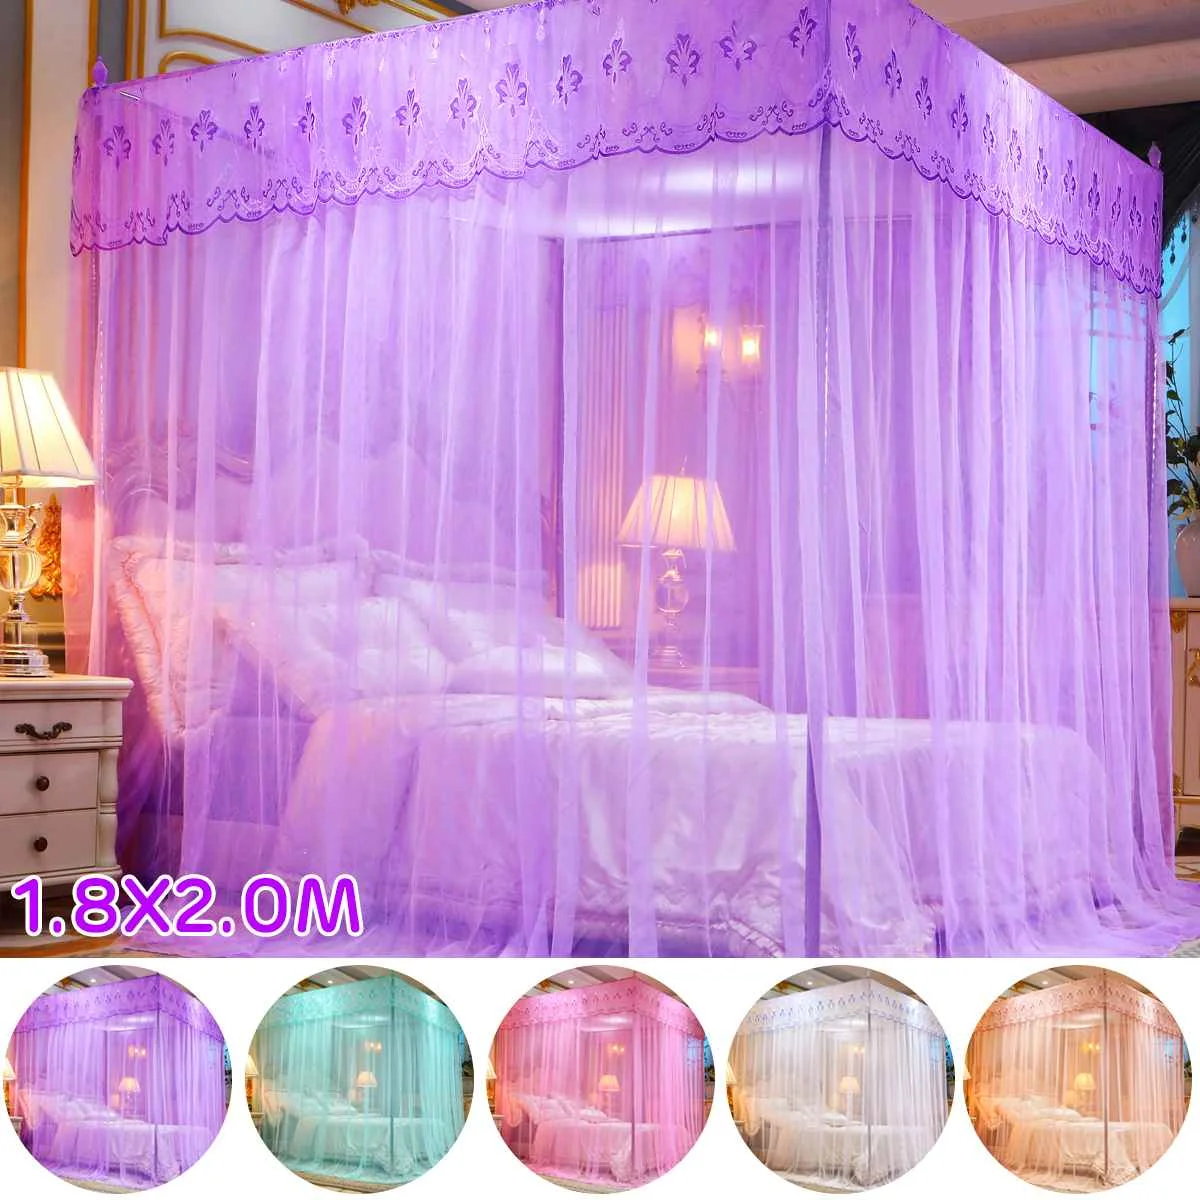 

Four Corner Mosquito Netting Canopy Mosquito Net For Double Bed Insect Reject Canopy Bed Curtain Mosquito Repellent Tent